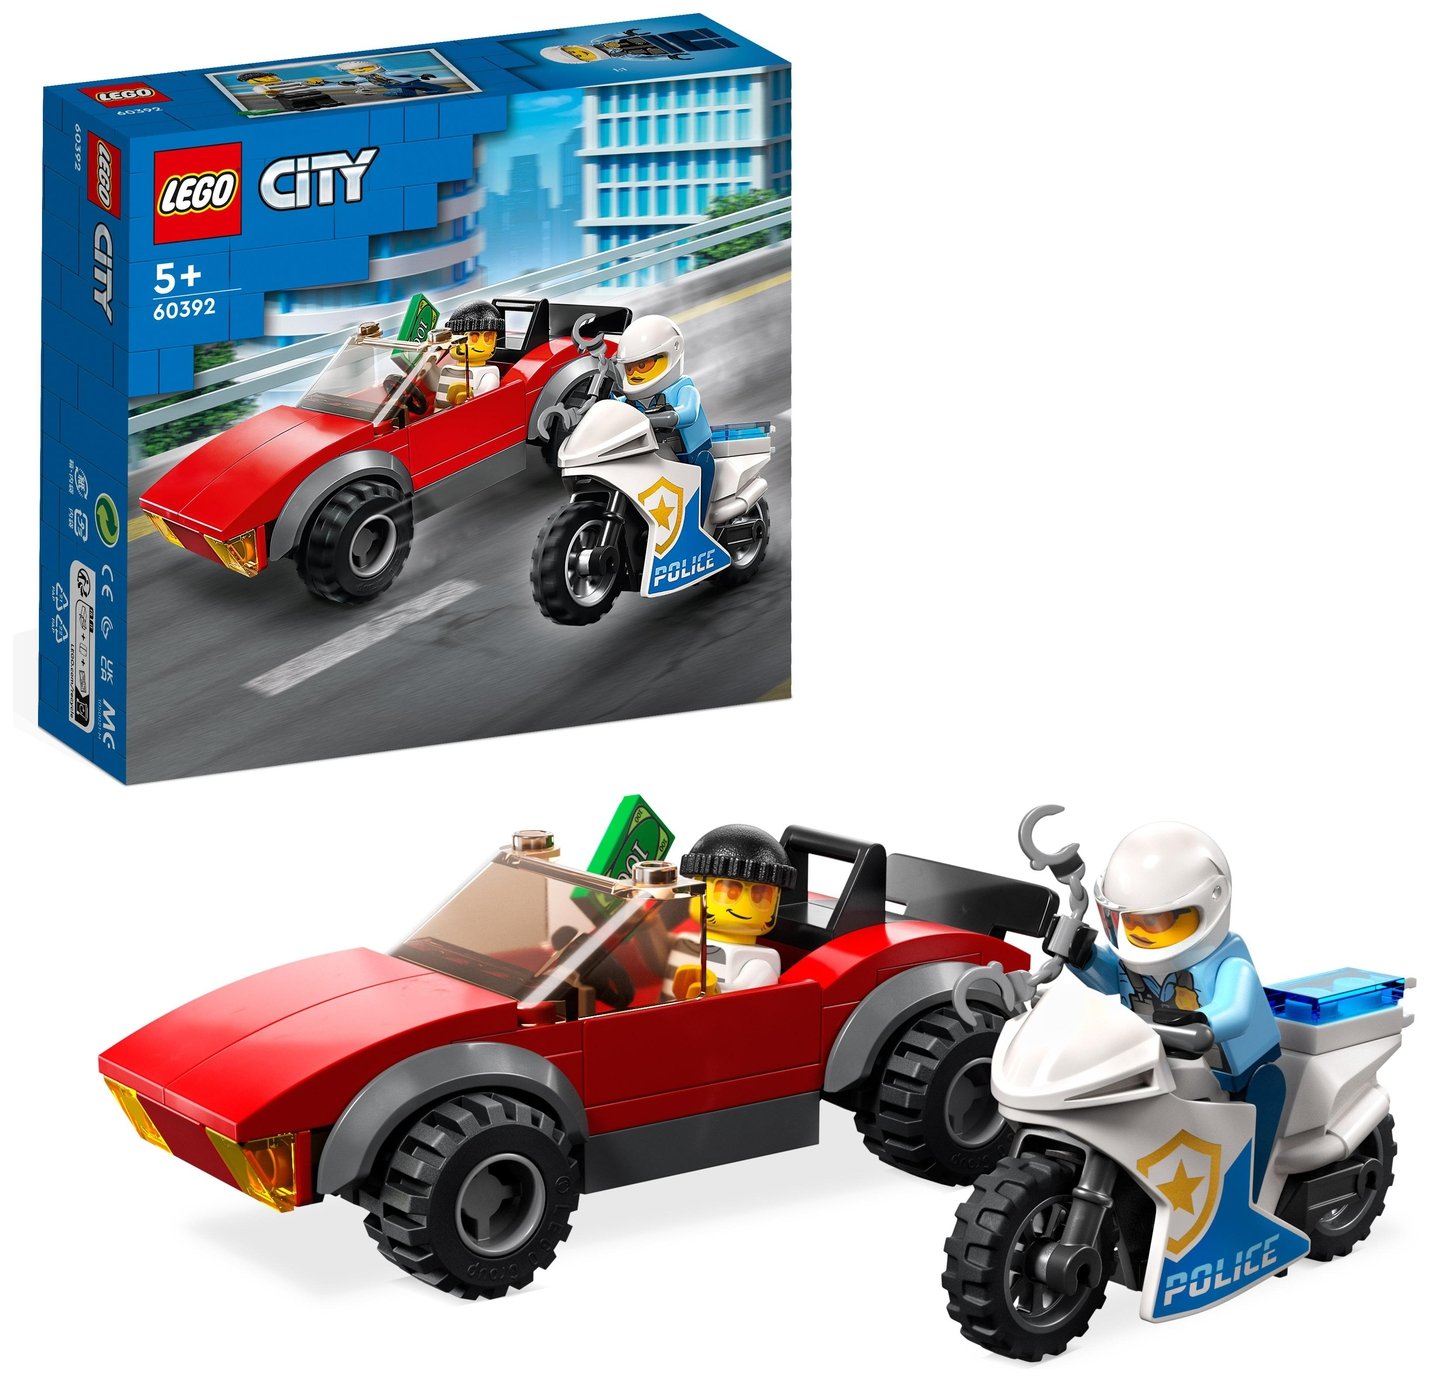 LEGO City Police Bike Car Chase Set with Toy Motorbike 60392 review